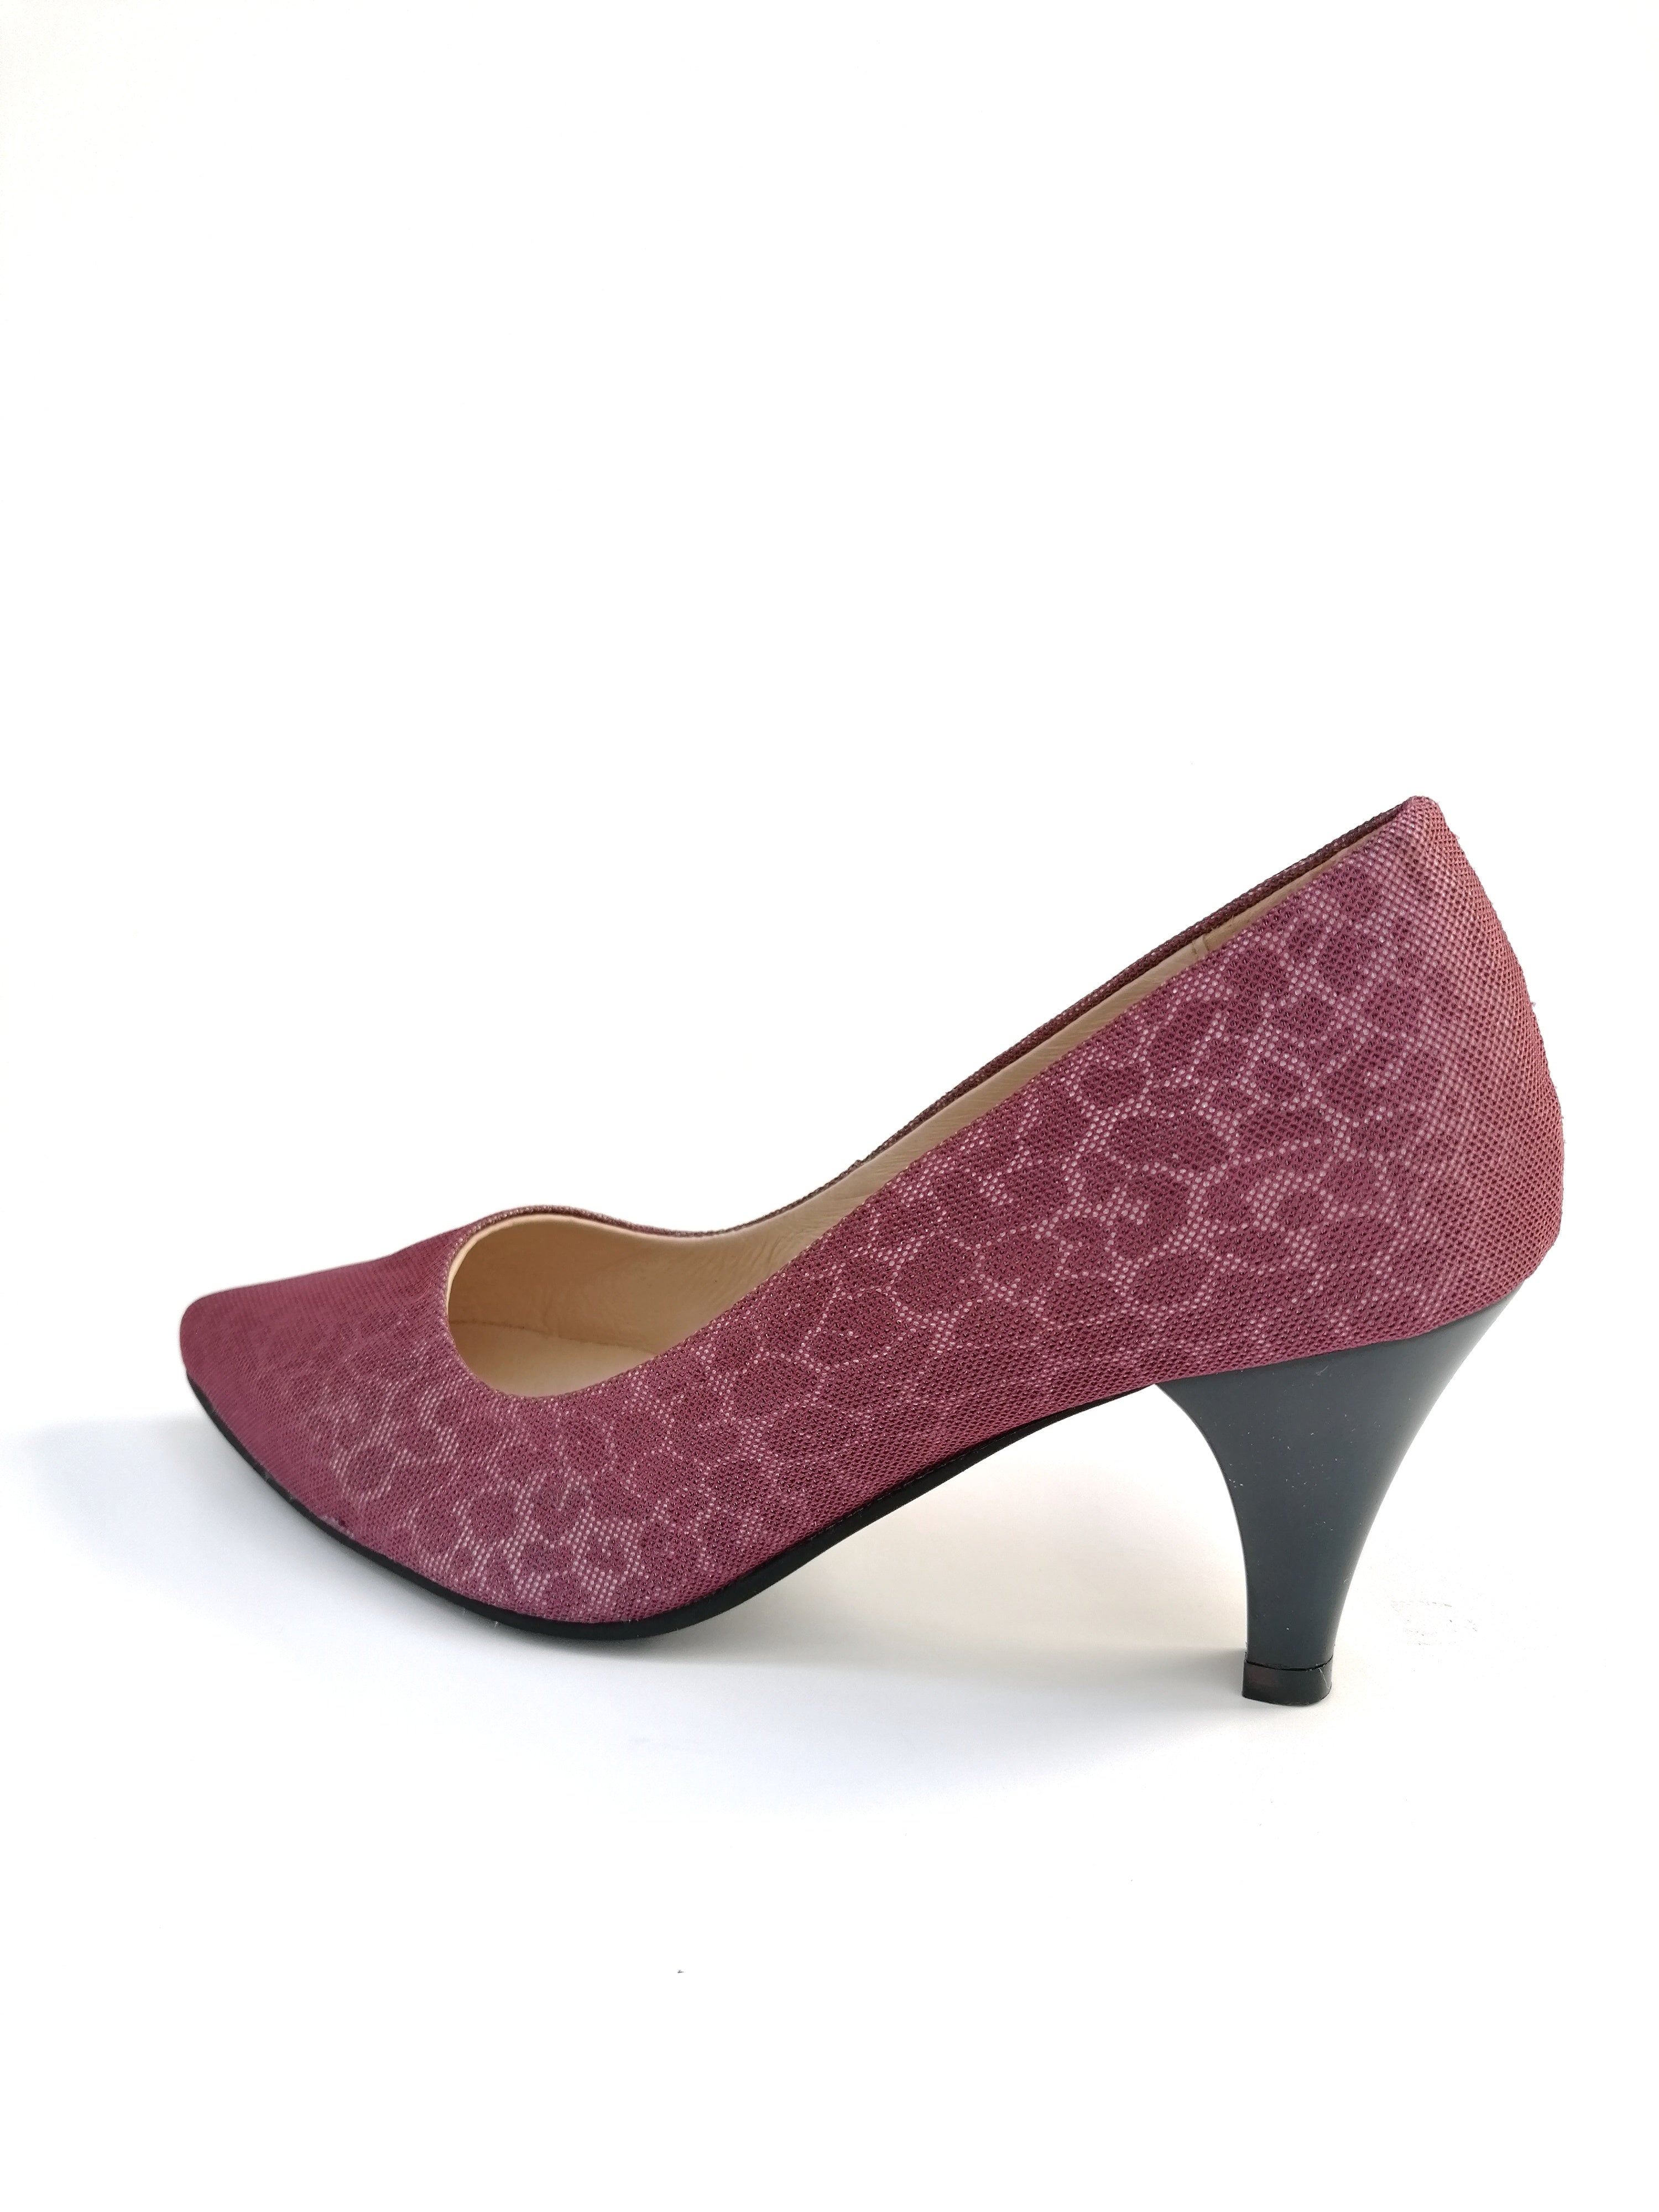 Bordeaux with printed MESH pumps